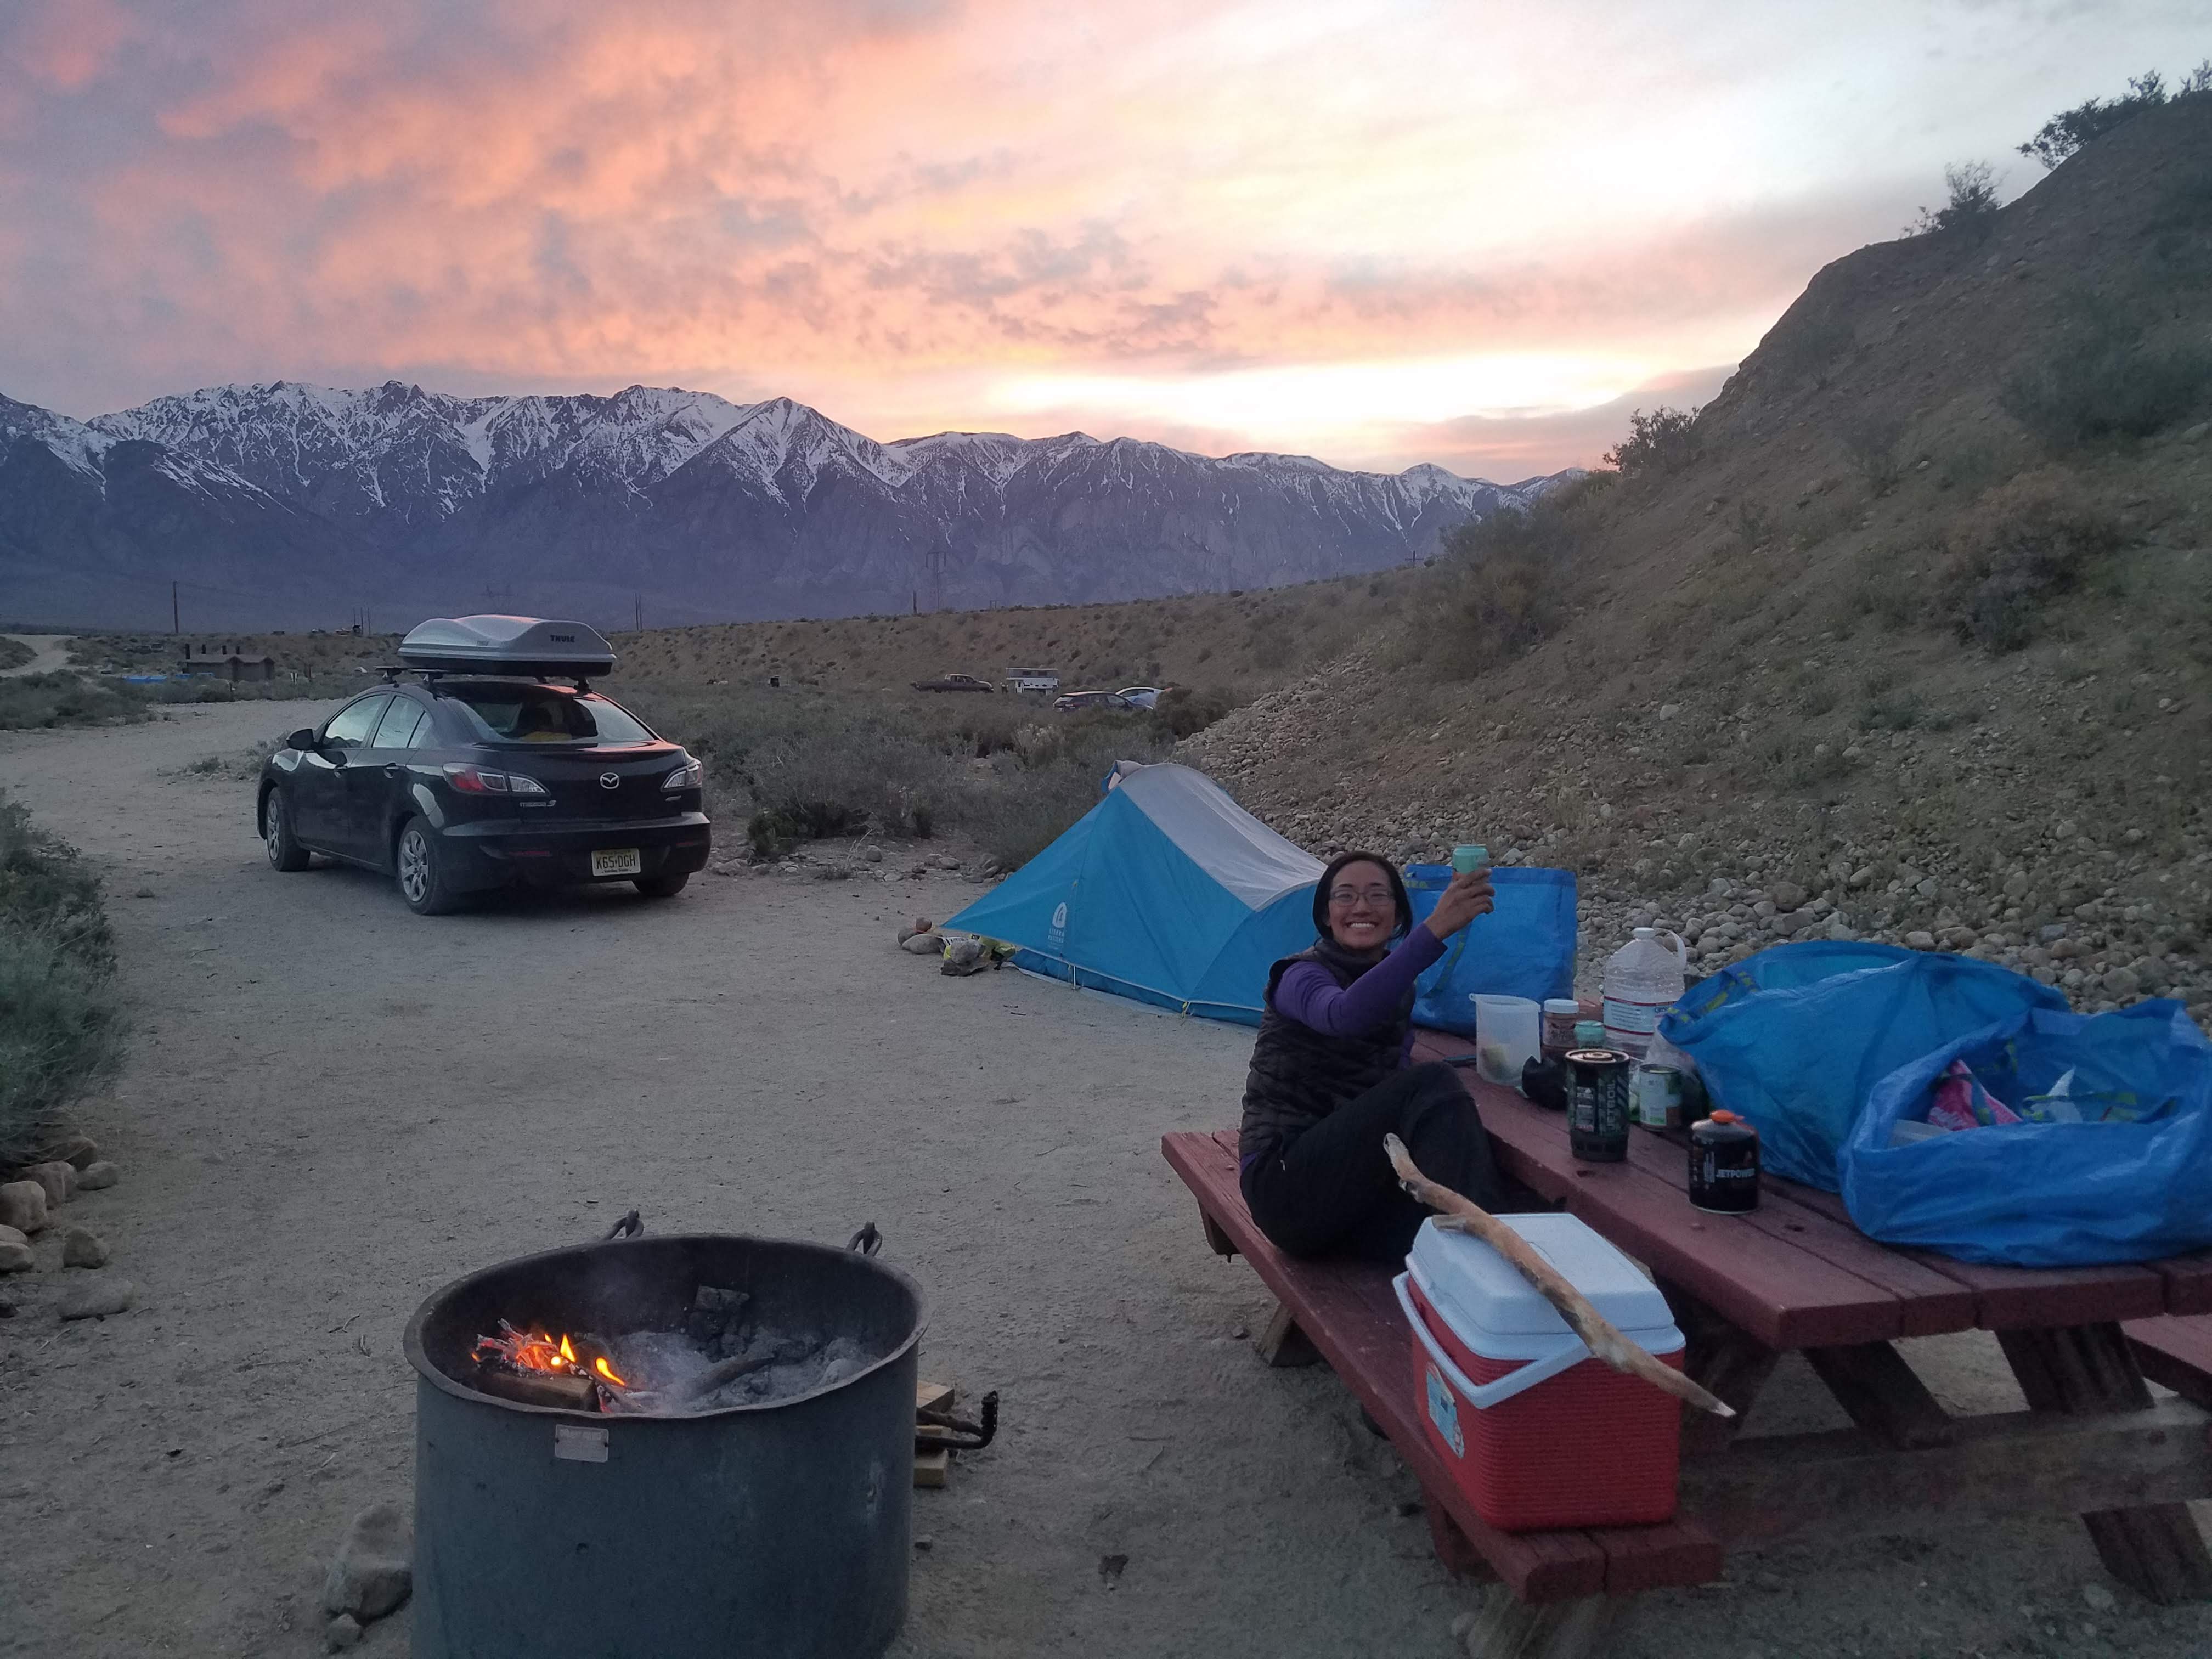 Our campsite home for a week in Bishop.